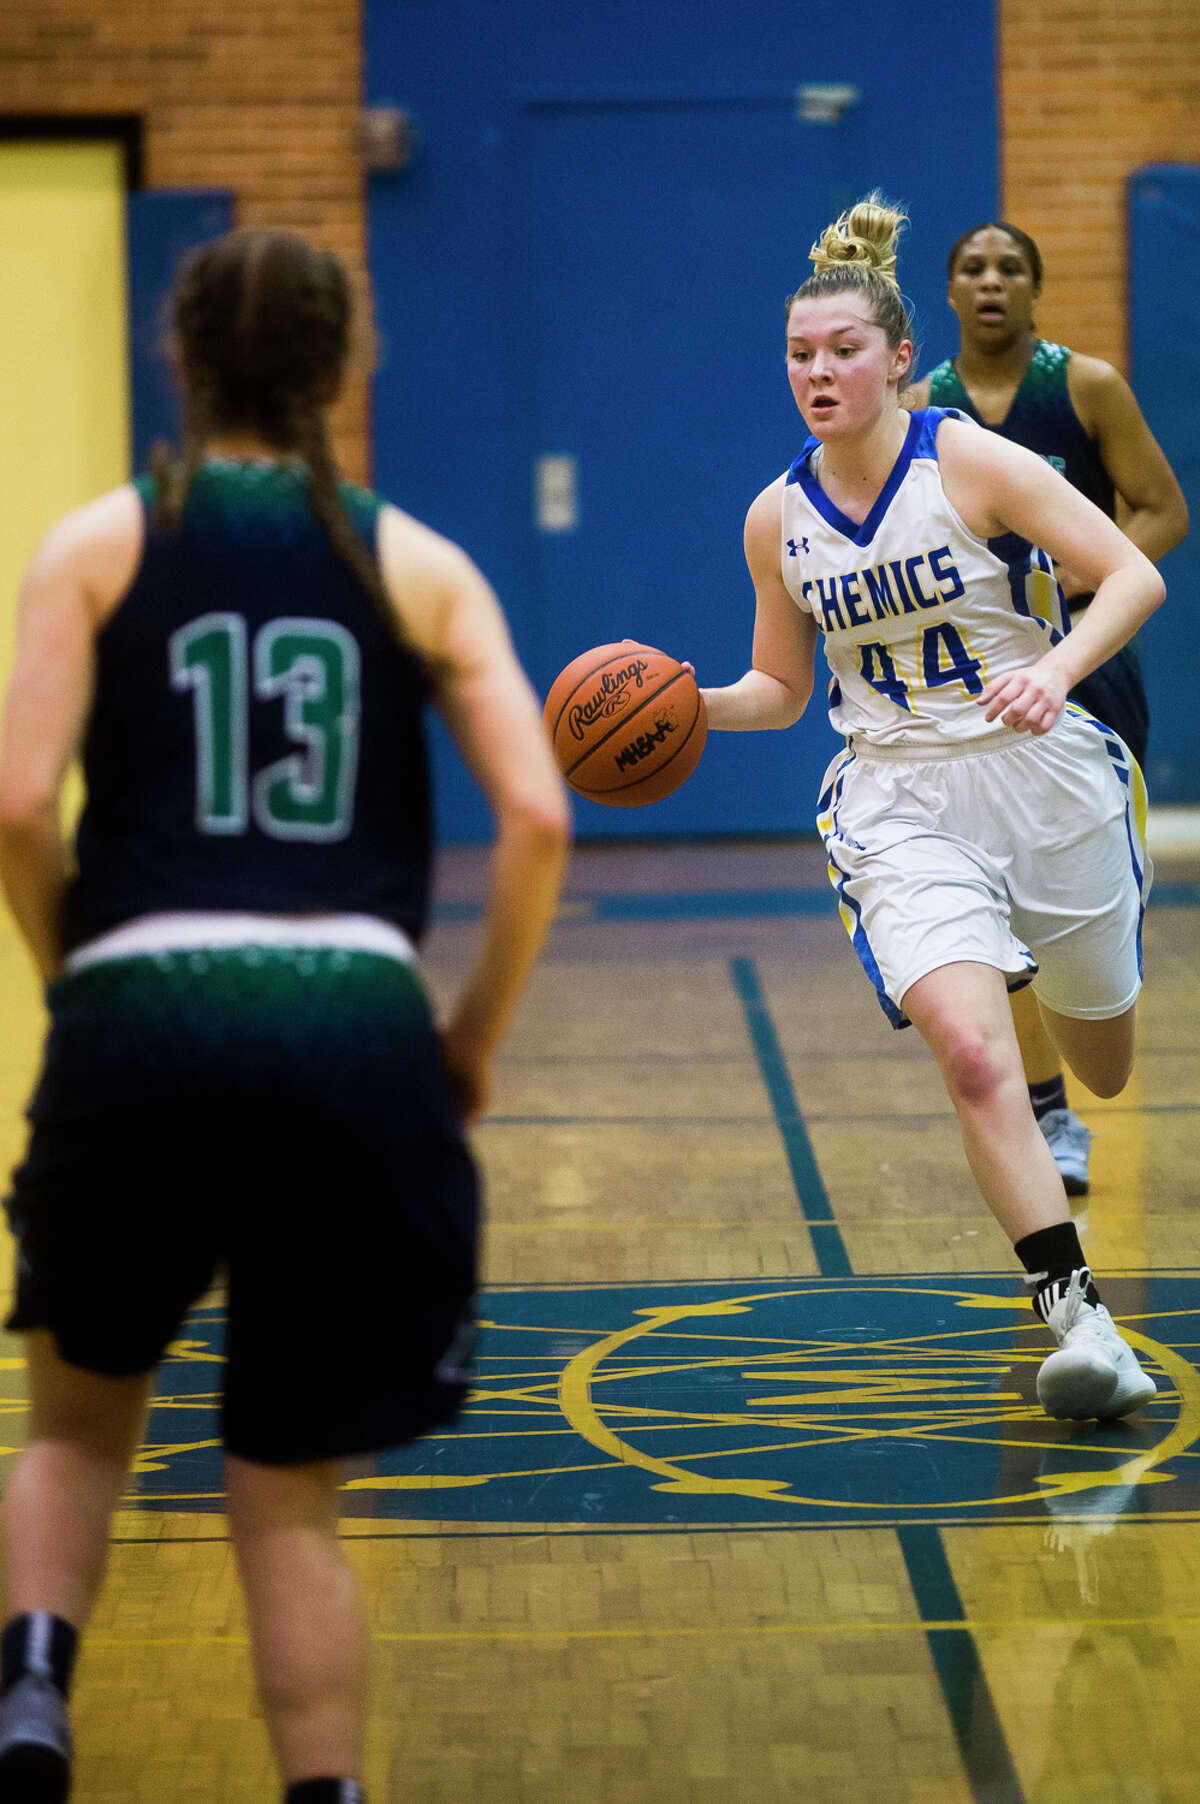 Midland senior Maddie Barrie dribbles down the court during the Chemics' district semifinals game against Saginaw Heritage on Wednesday, Feb. 28, 2018 at Midland High School. (Katy Kildee/kkildee@mdn.net)